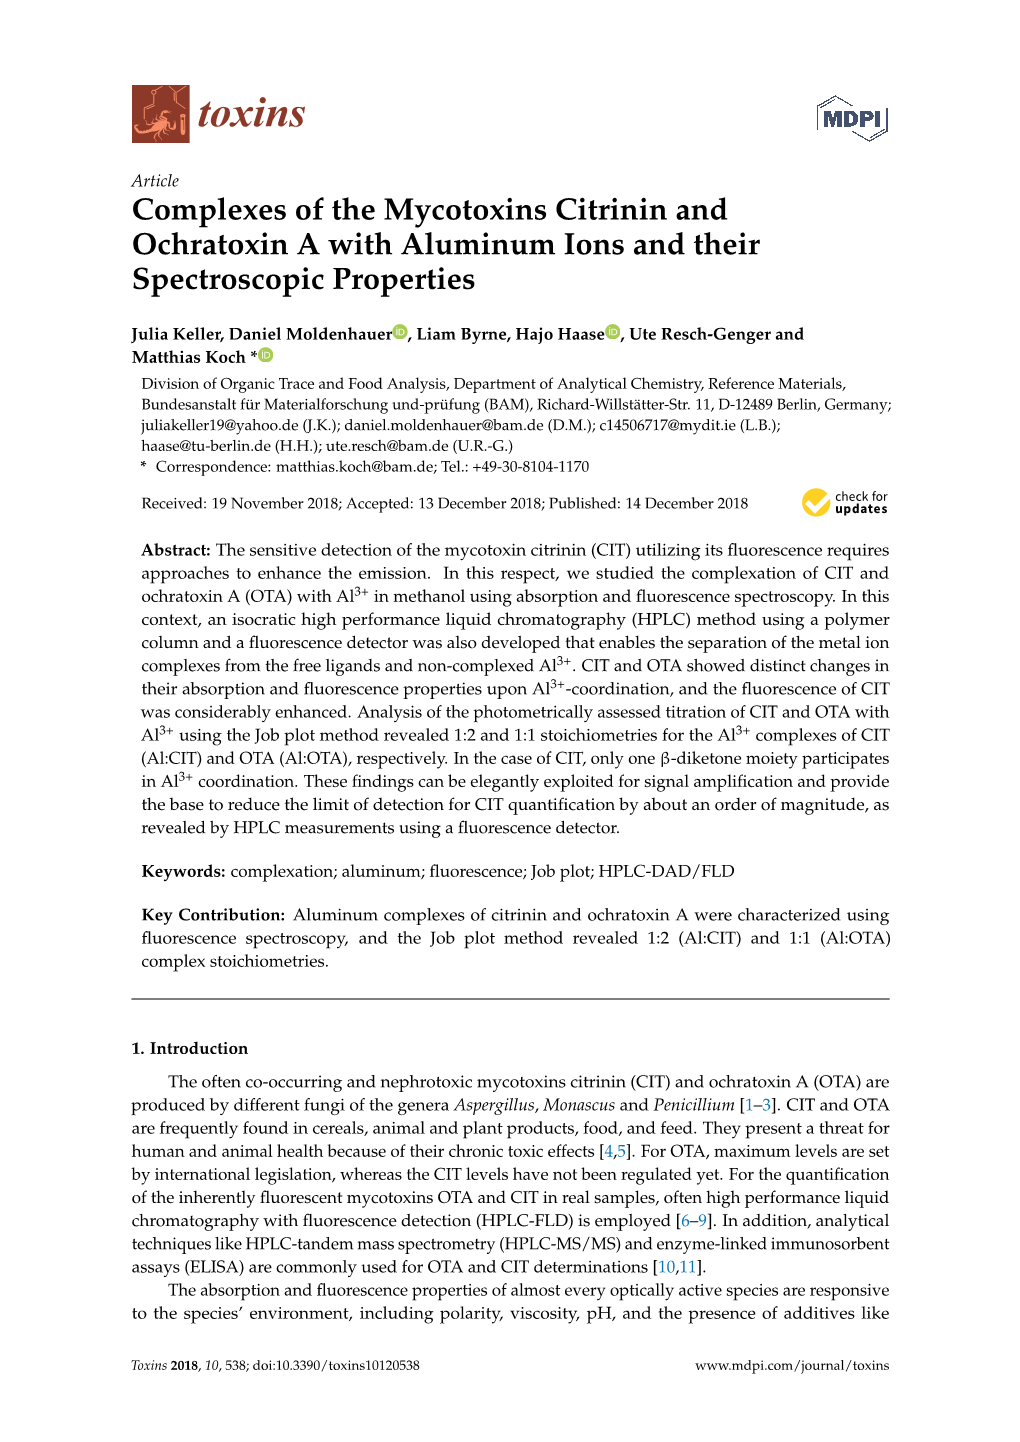 Complexes of the Mycotoxins Citrinin and Ochratoxin a with Aluminum Ions and Their Spectroscopic Properties